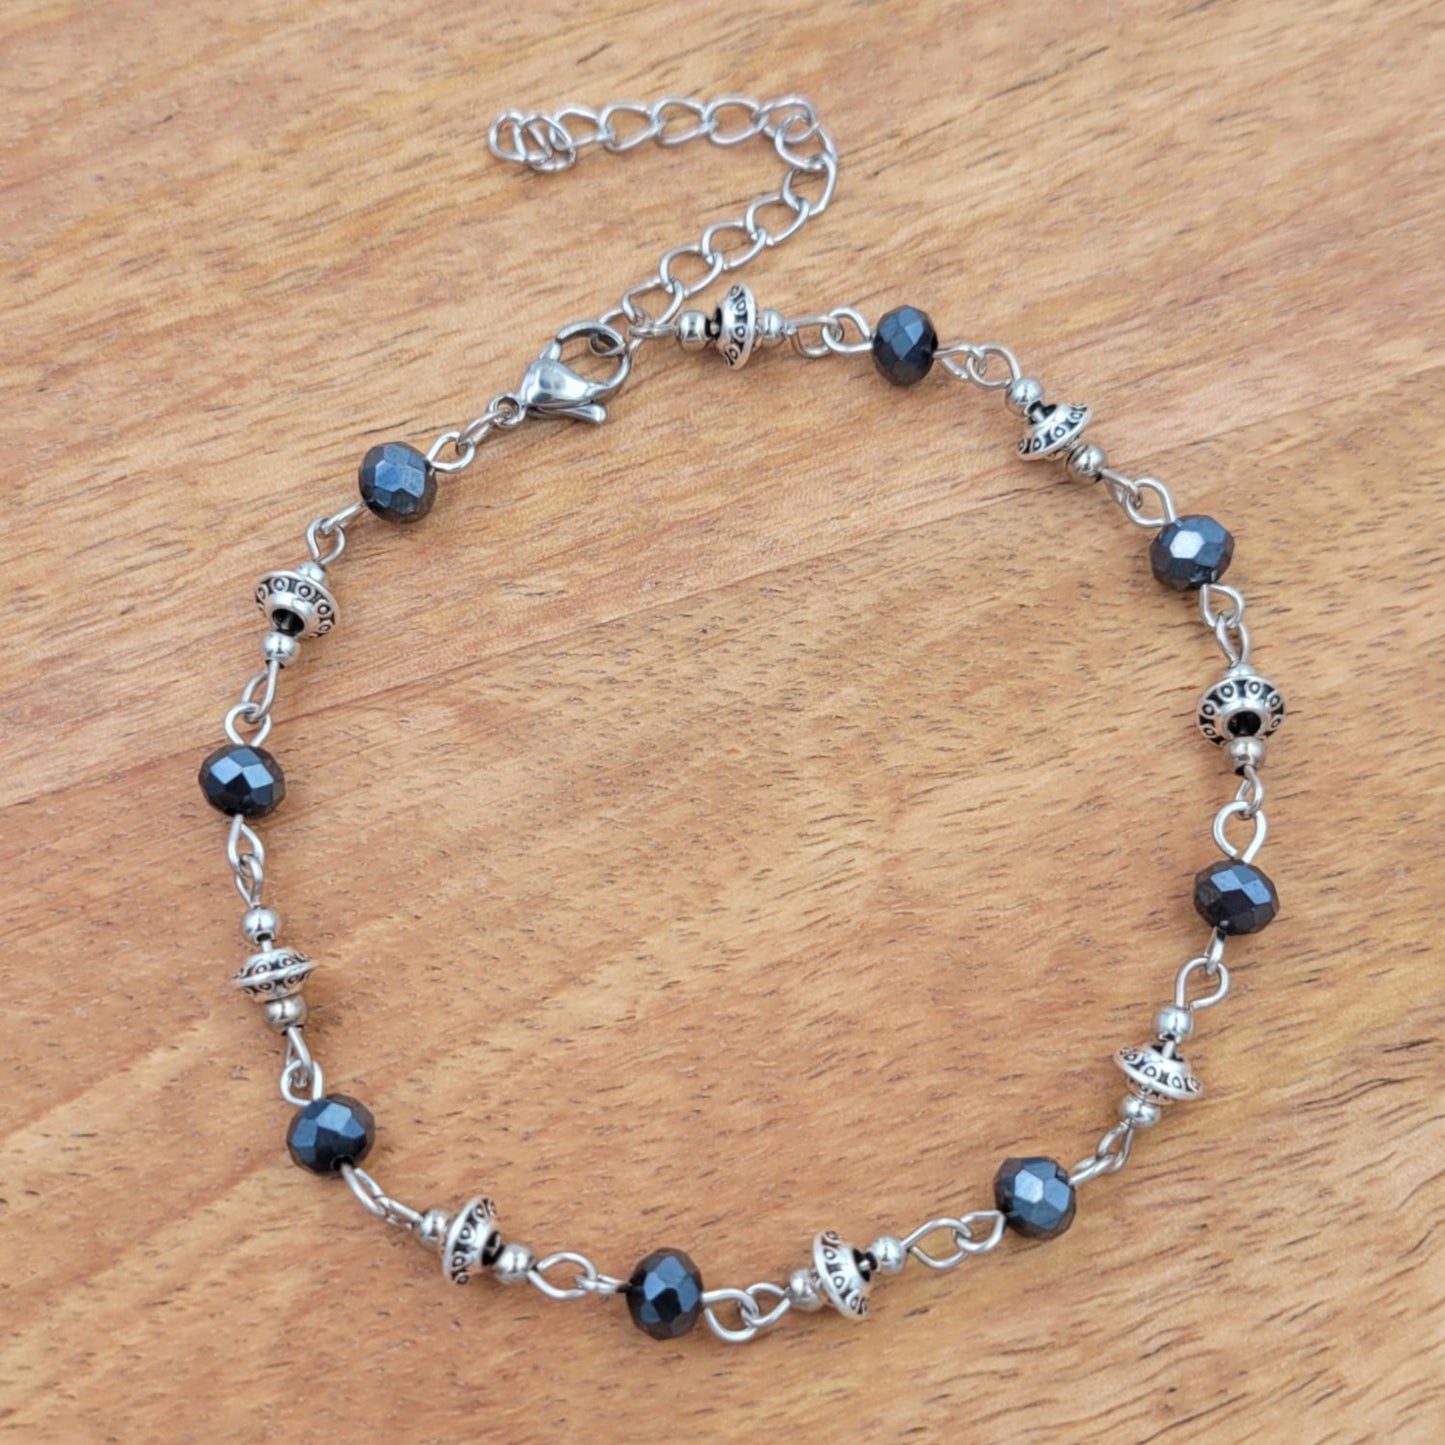 BESHEEK Silvertone SLATE BLUE Faceted Crystal Chain Artisan Beaded Anklet with Extension | Handmade Hypoallergenic Beach Gala Wedding Style Jewelry